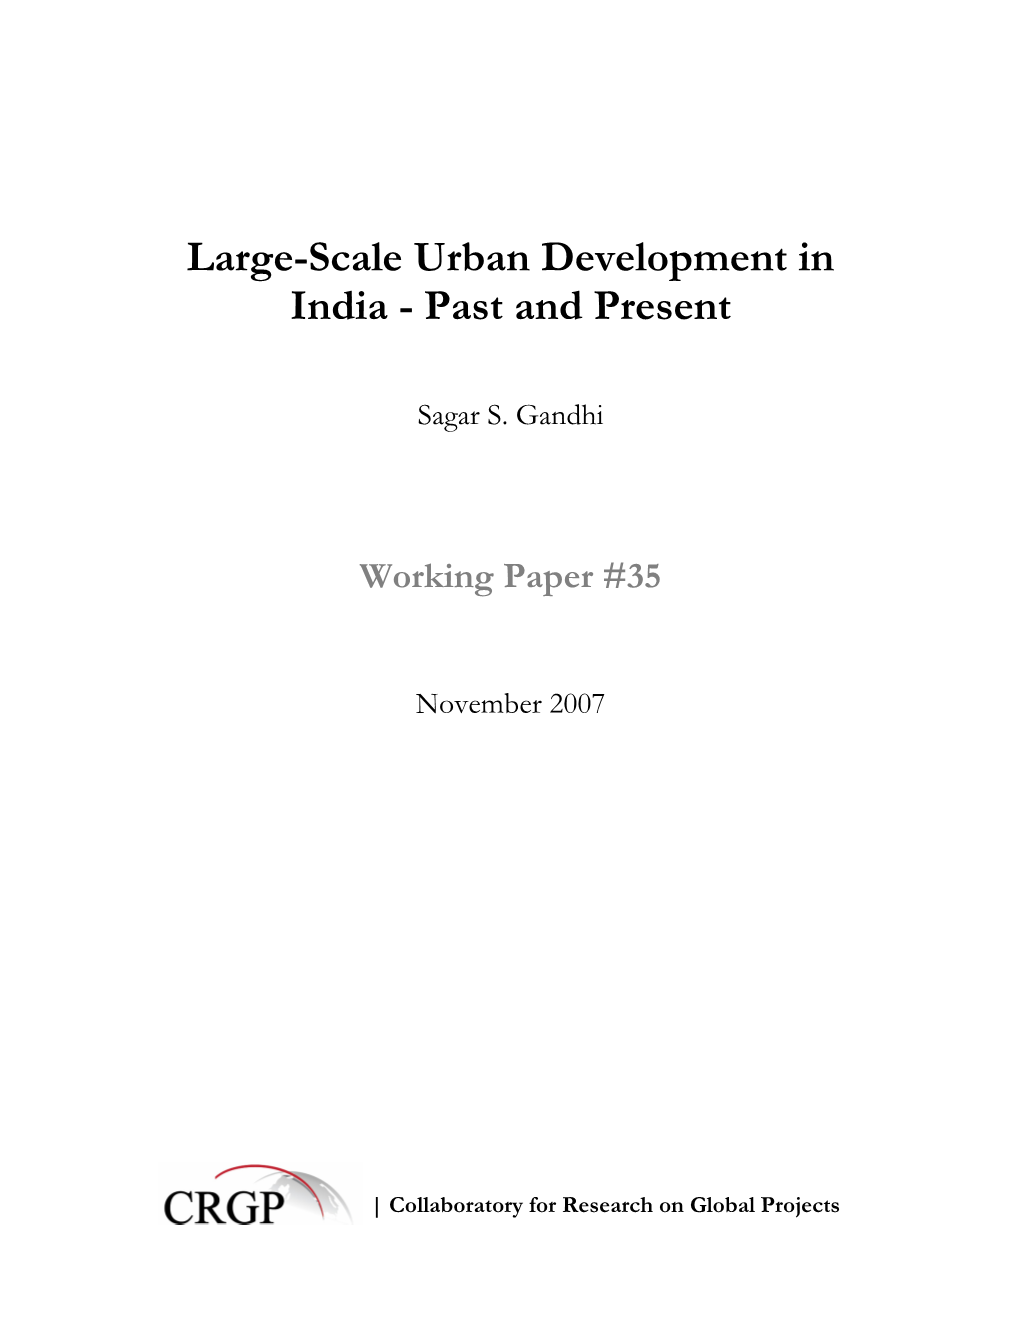 Large-Scale Urban Development in India - Past and Present